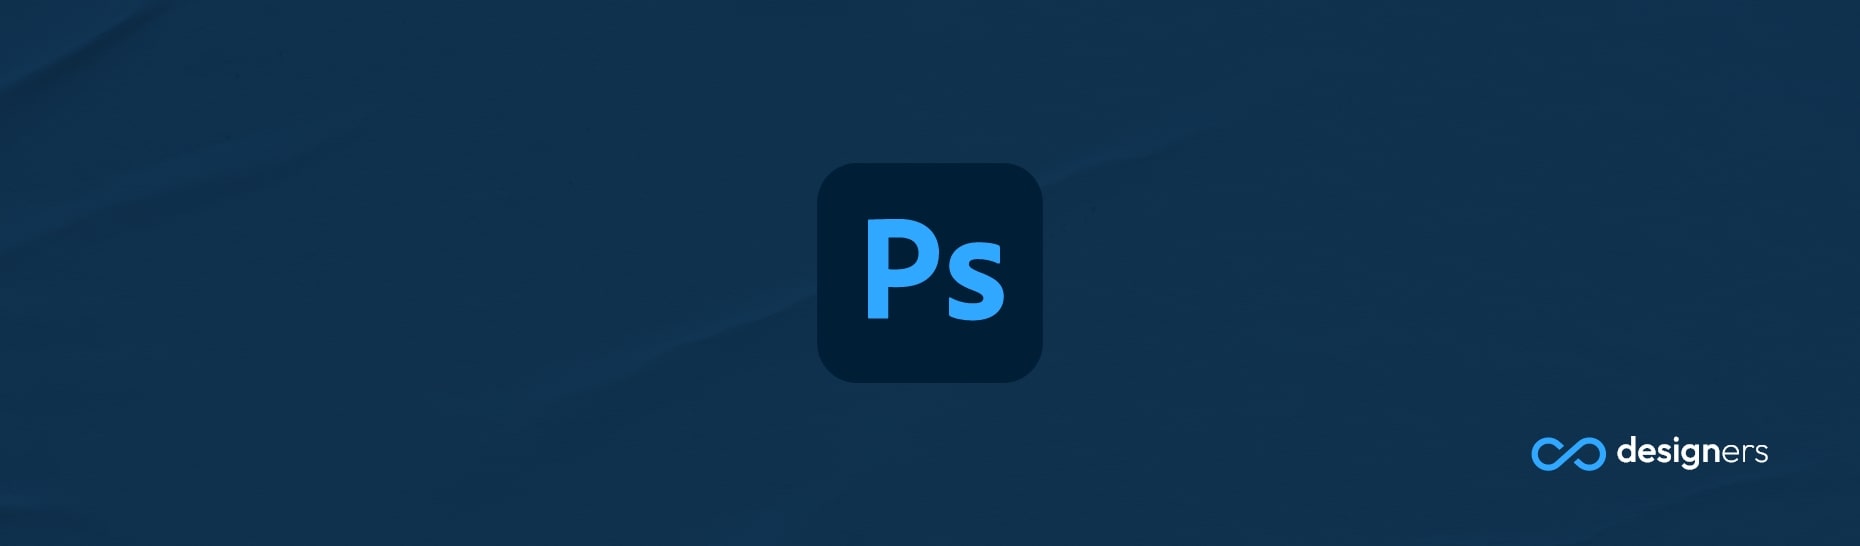 How Do I Save an Animated GIF in Photoshop?